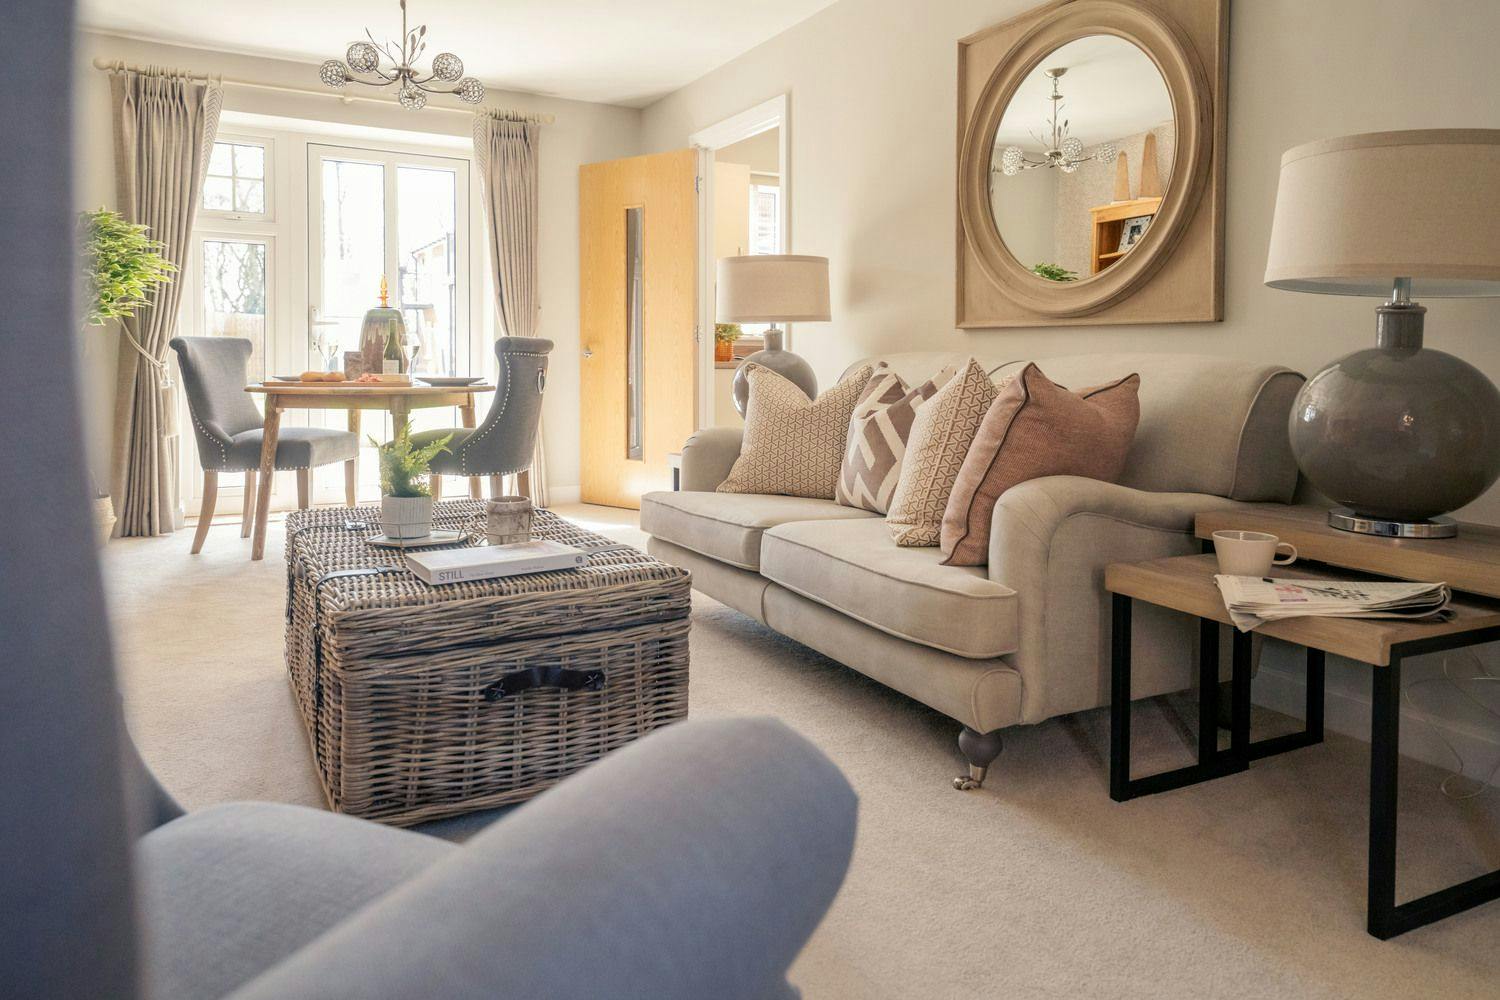 Living Room at Sydney Court Retirement Development in Sidcup, Bexley